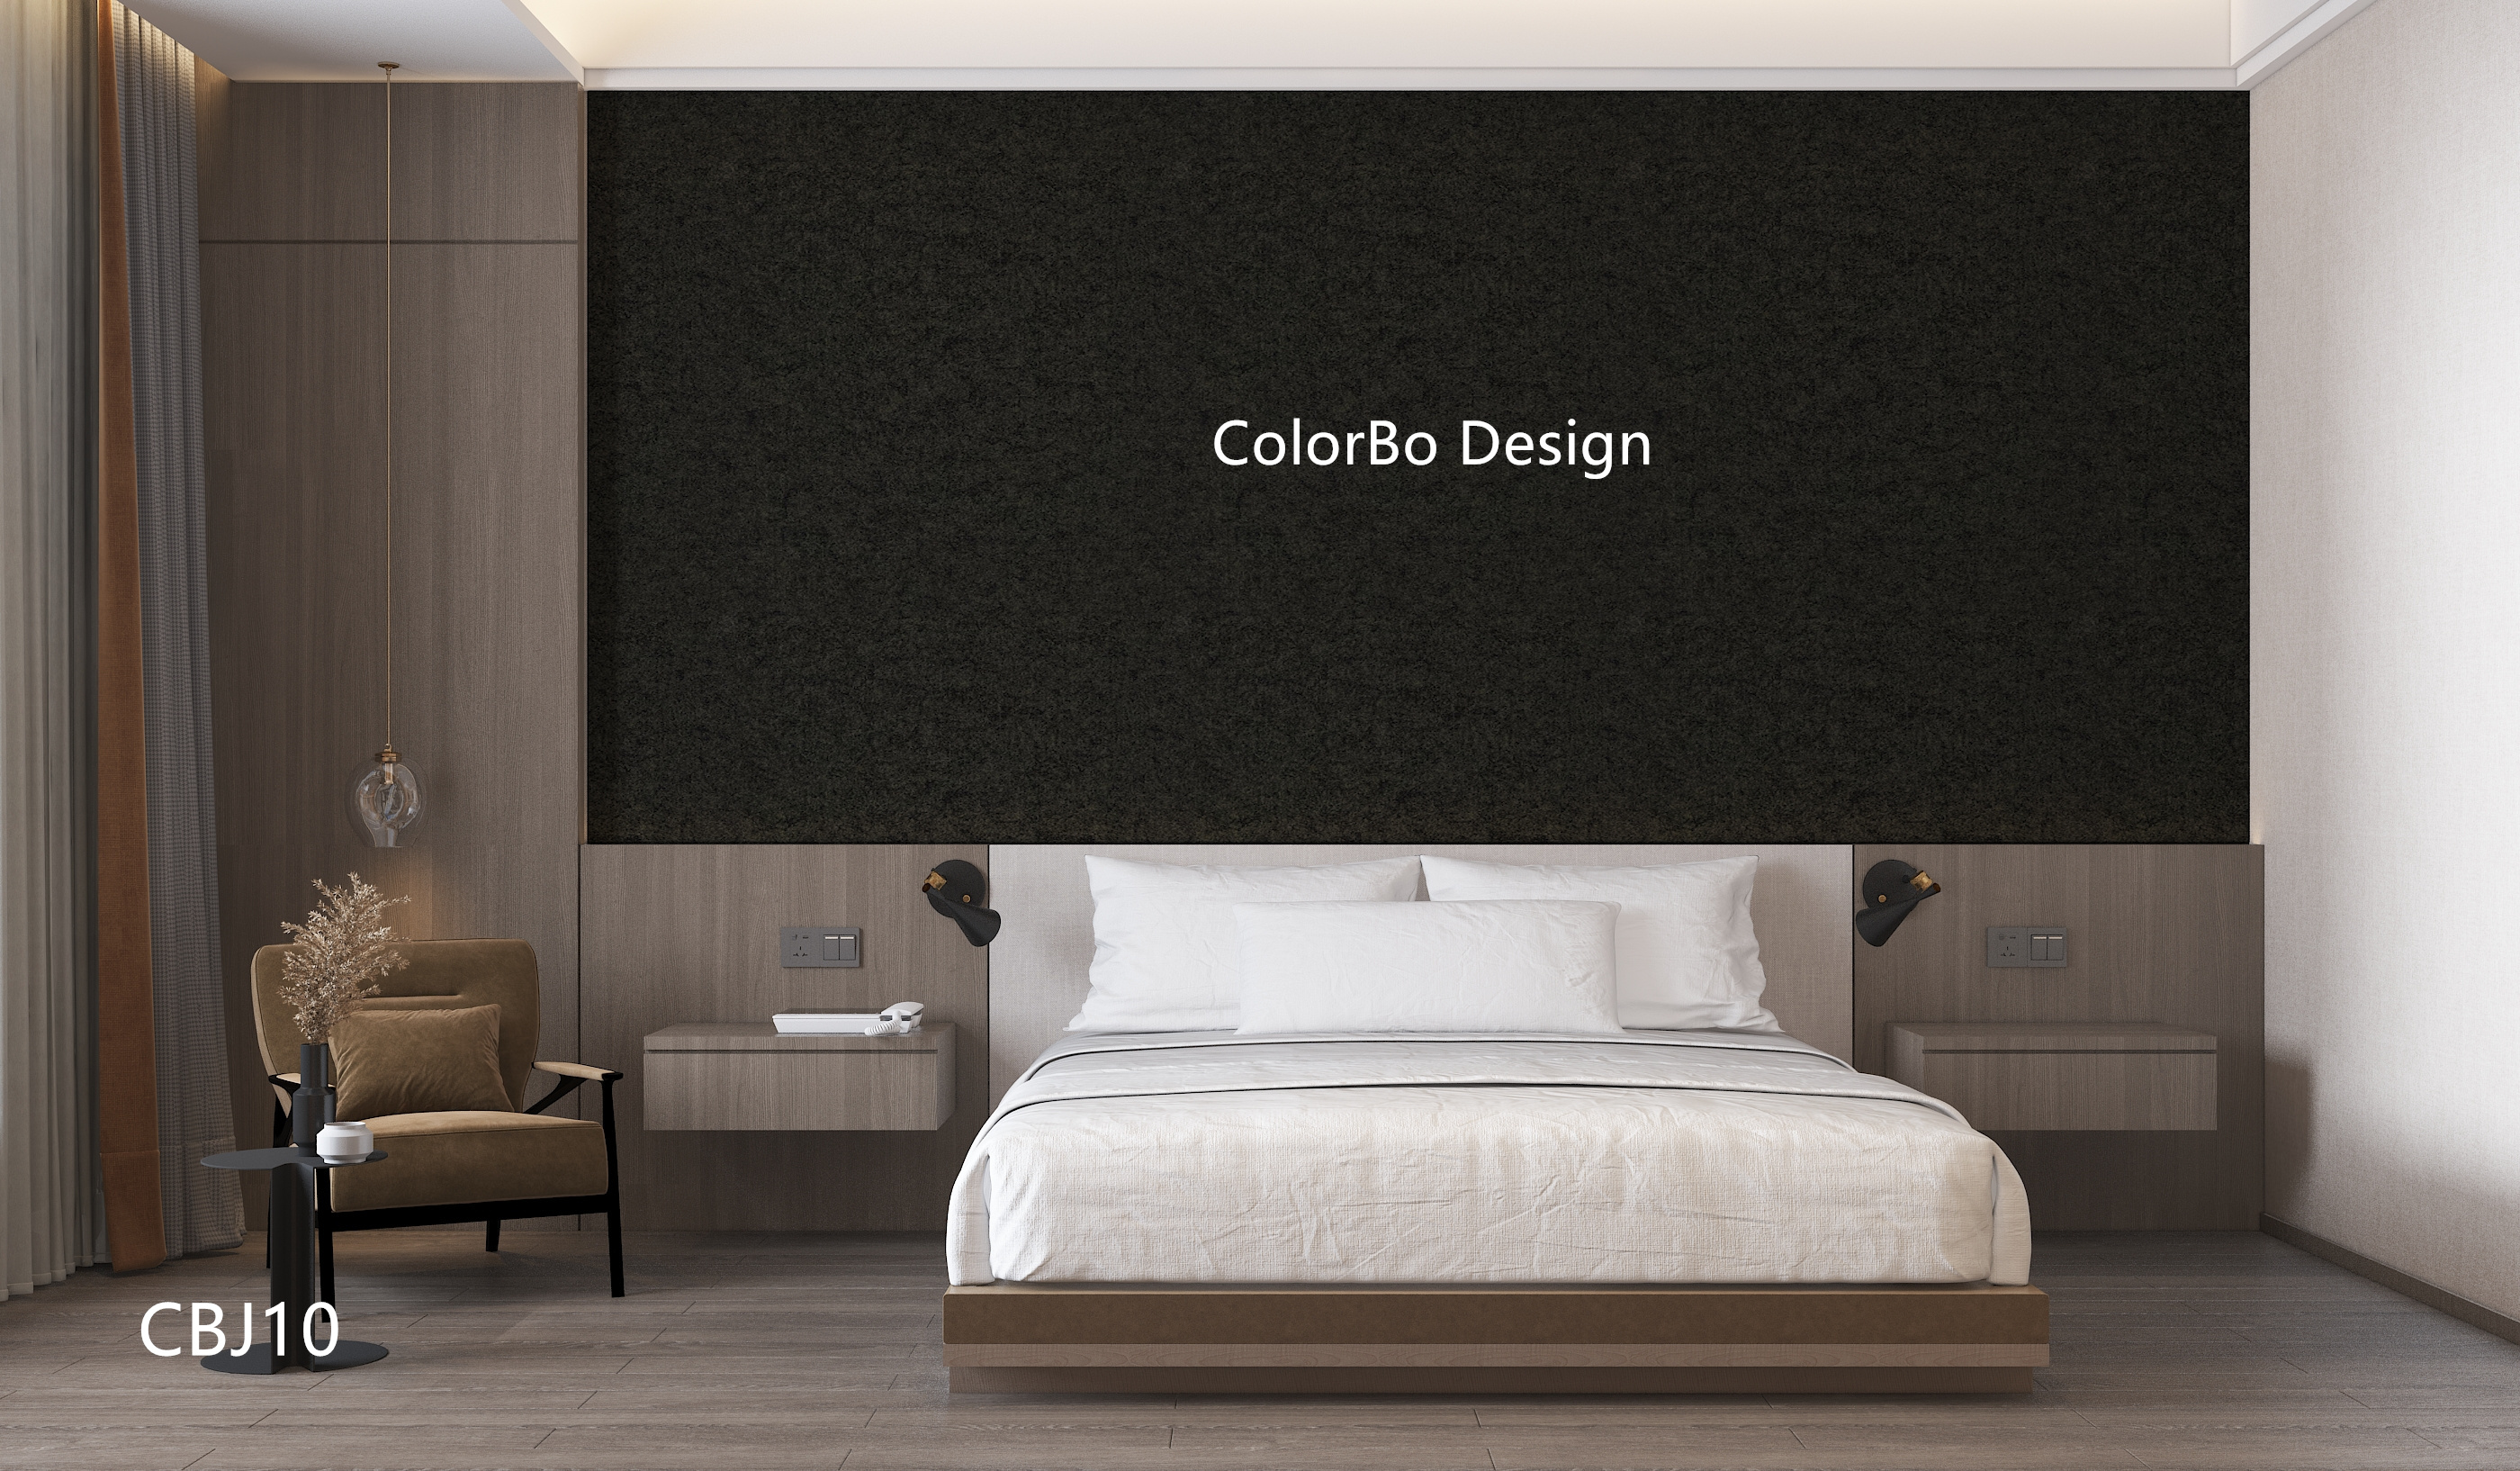 CBJ10 Polyester Fiber Sound Absorption and Fireproof Plain Panel For Wall Decor